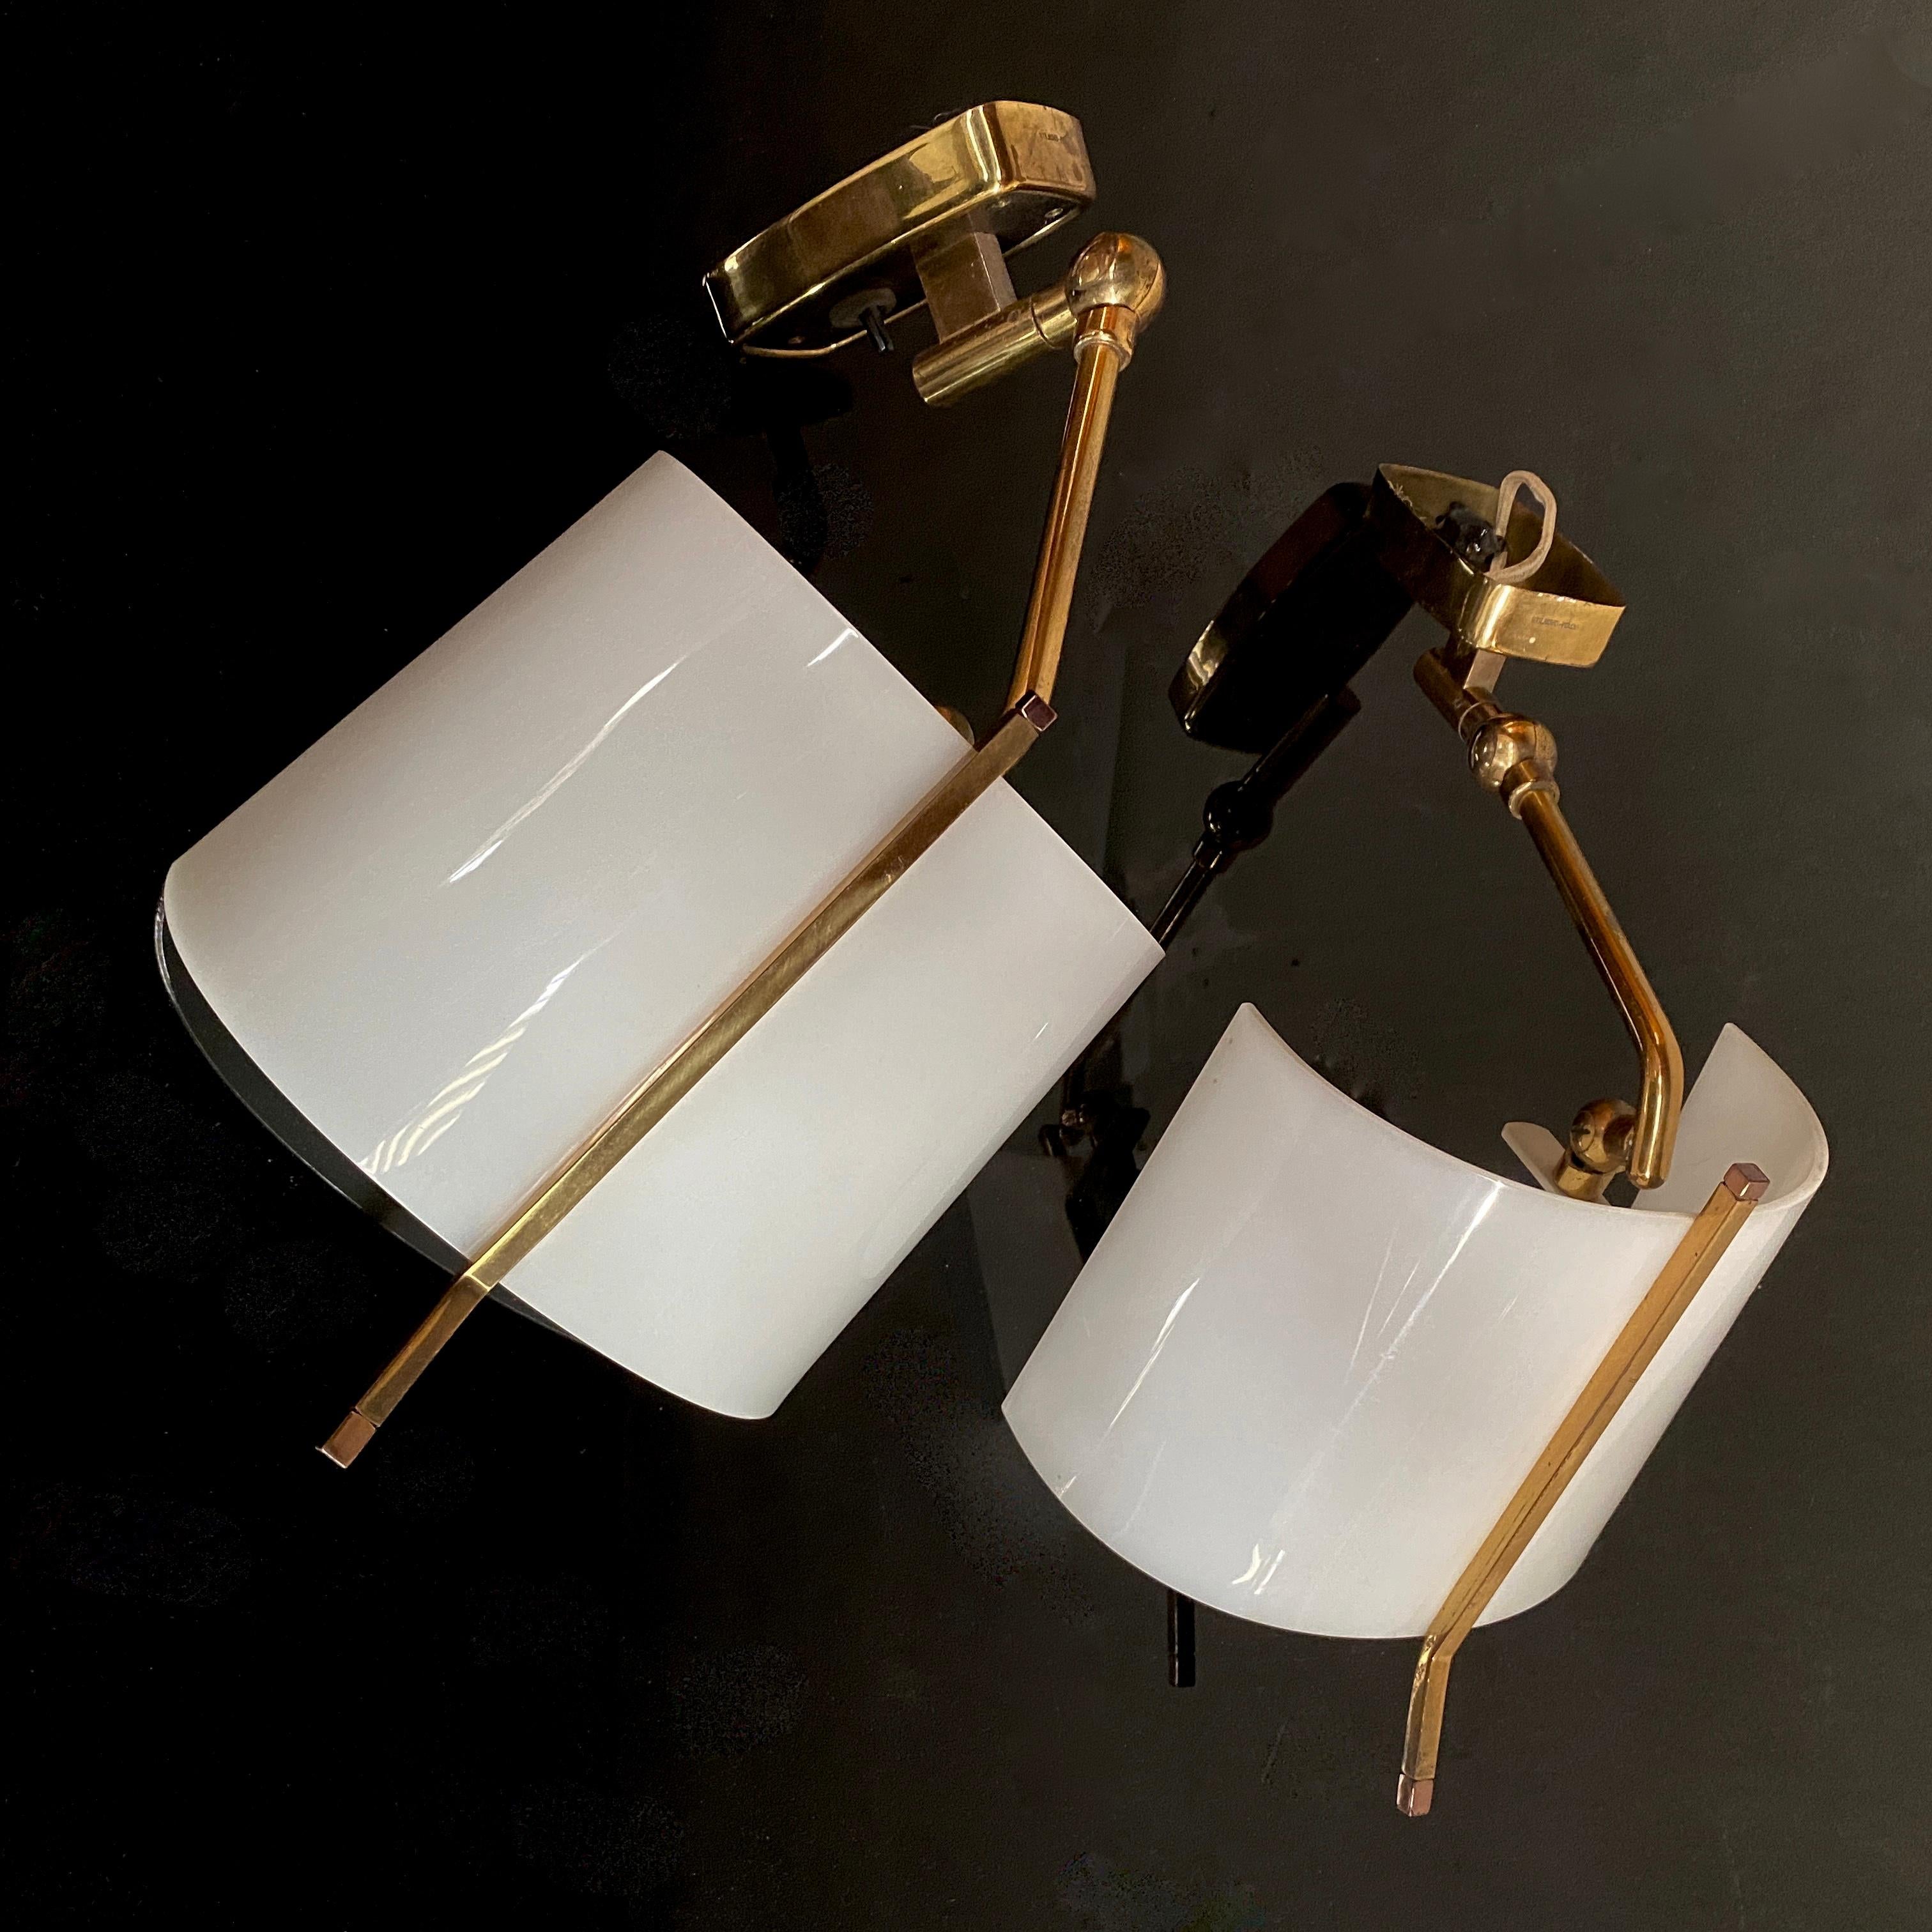 Stilnovo a Pair of Brass and Plexiglass Wall Lights, Italy, 1950s For Sale 4